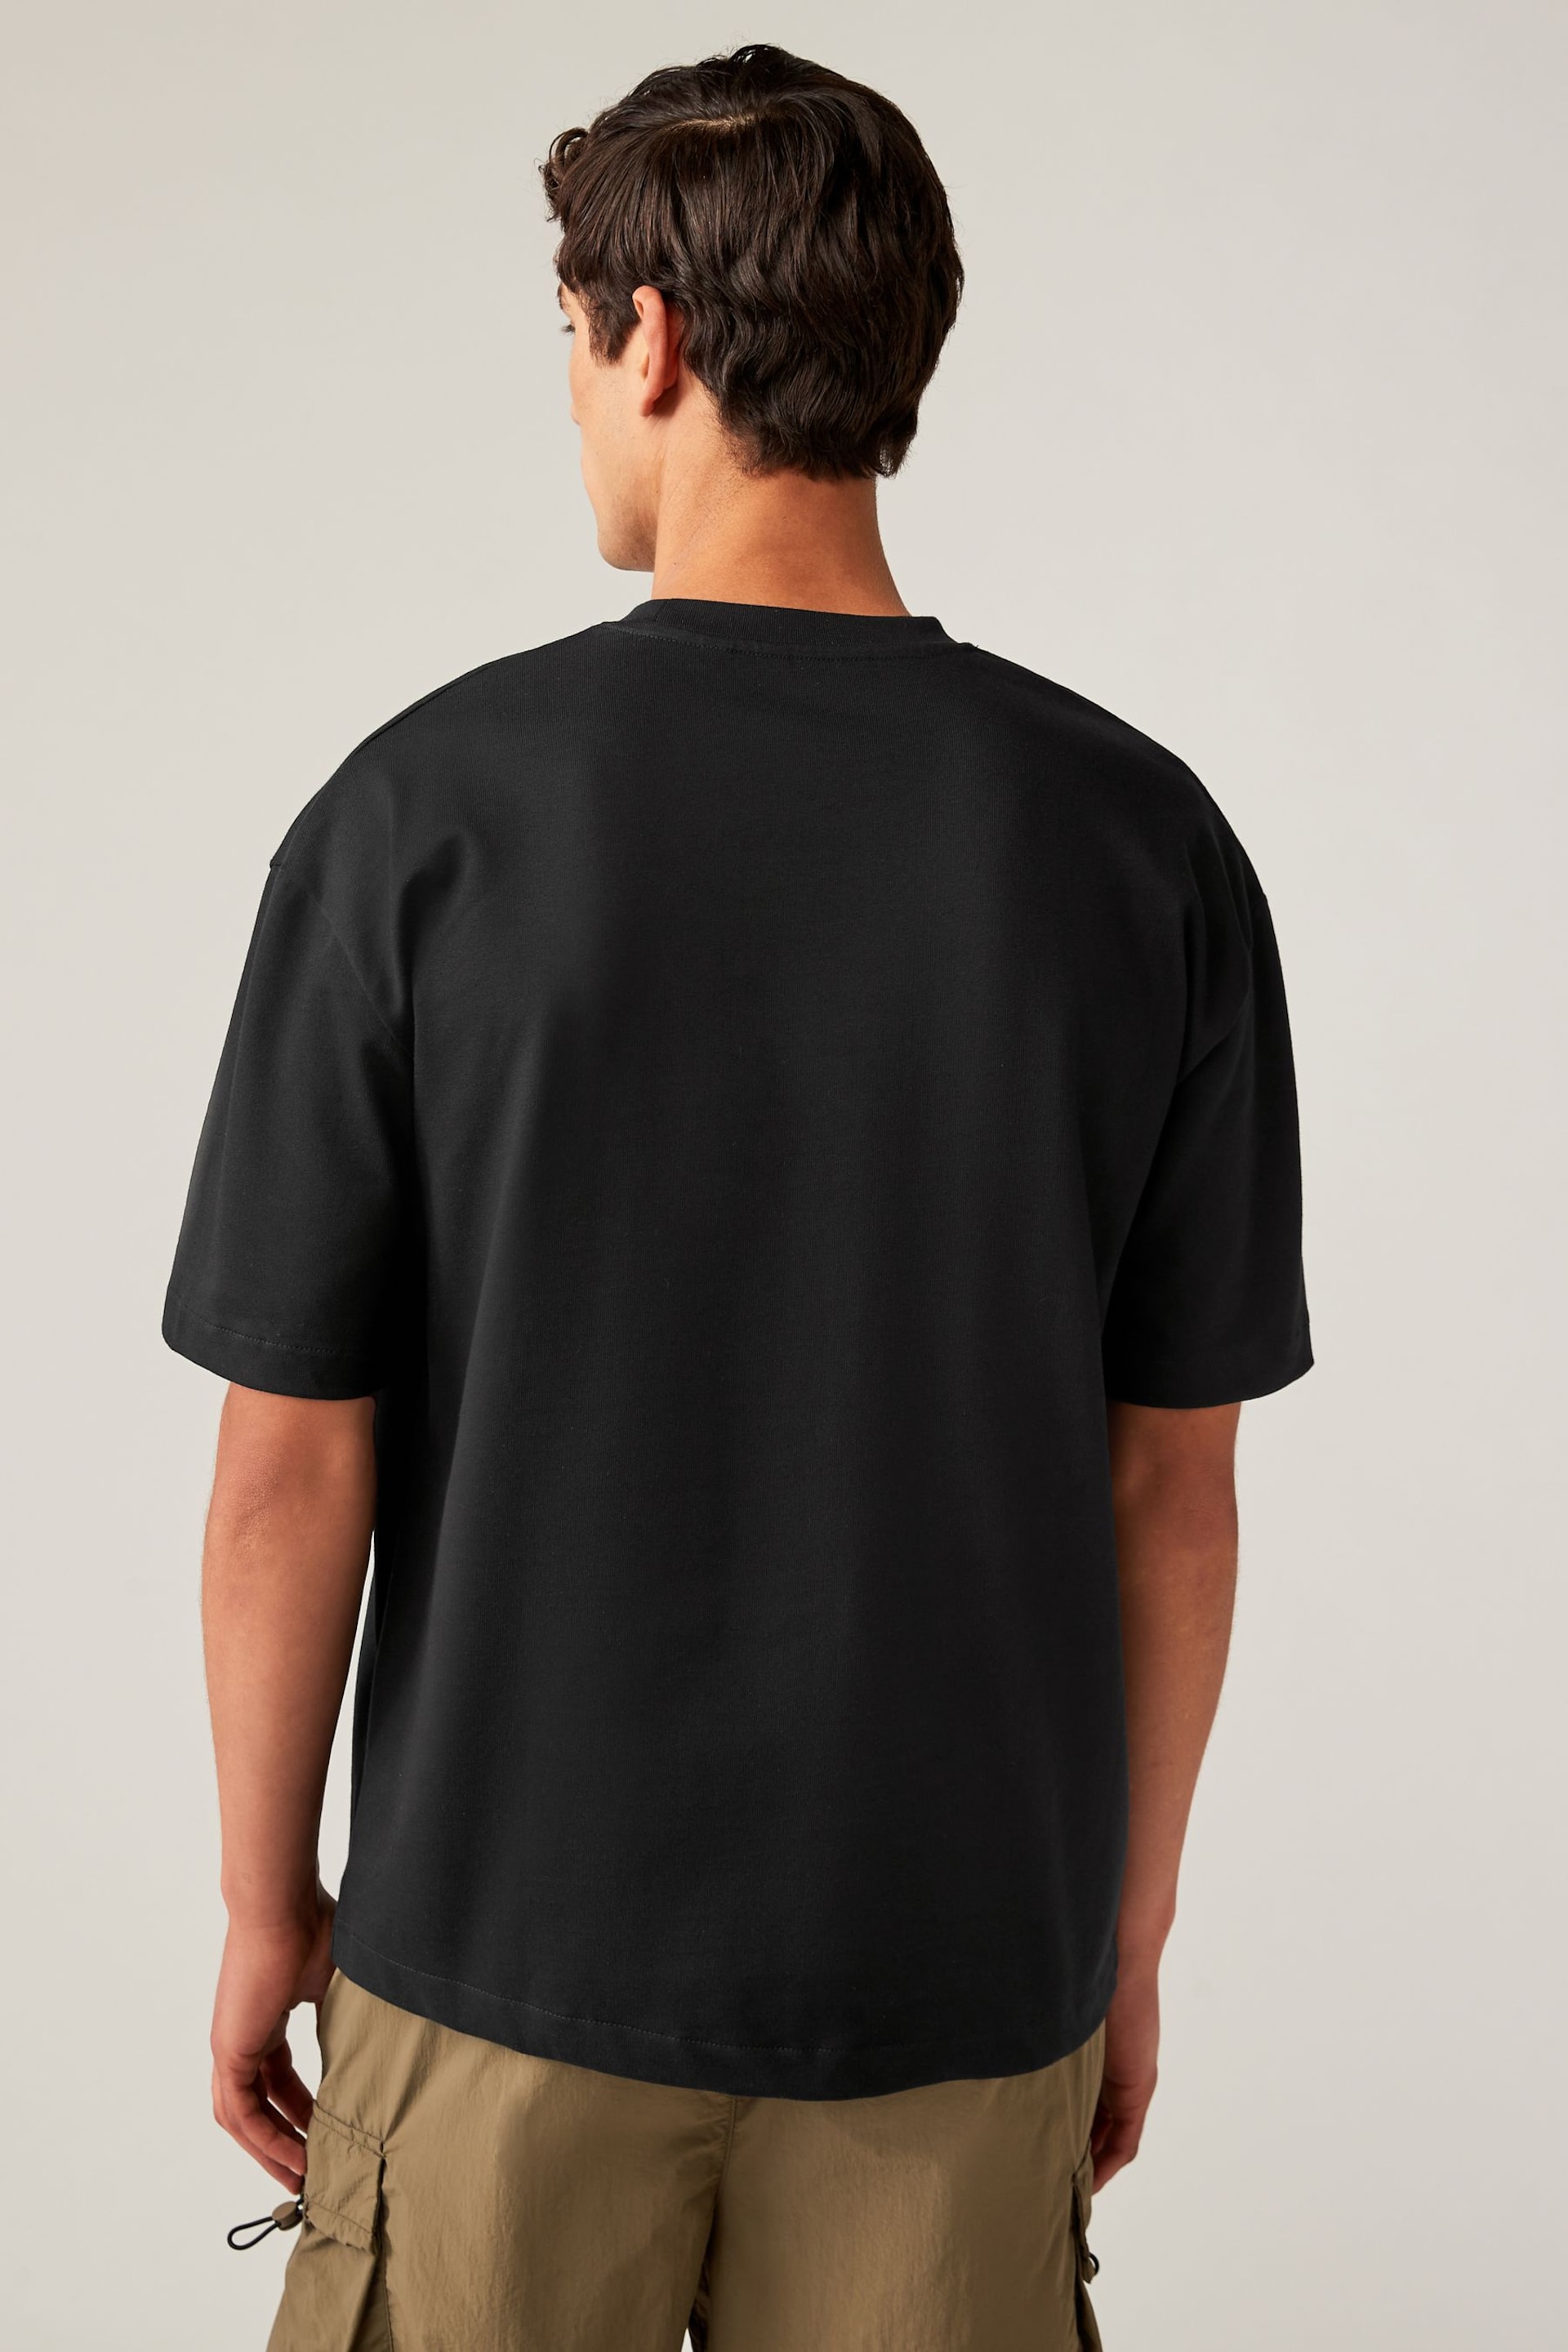 Black Relaxed Fit Heavy weight T-Shirts 3 Pack - Image 4 of 10